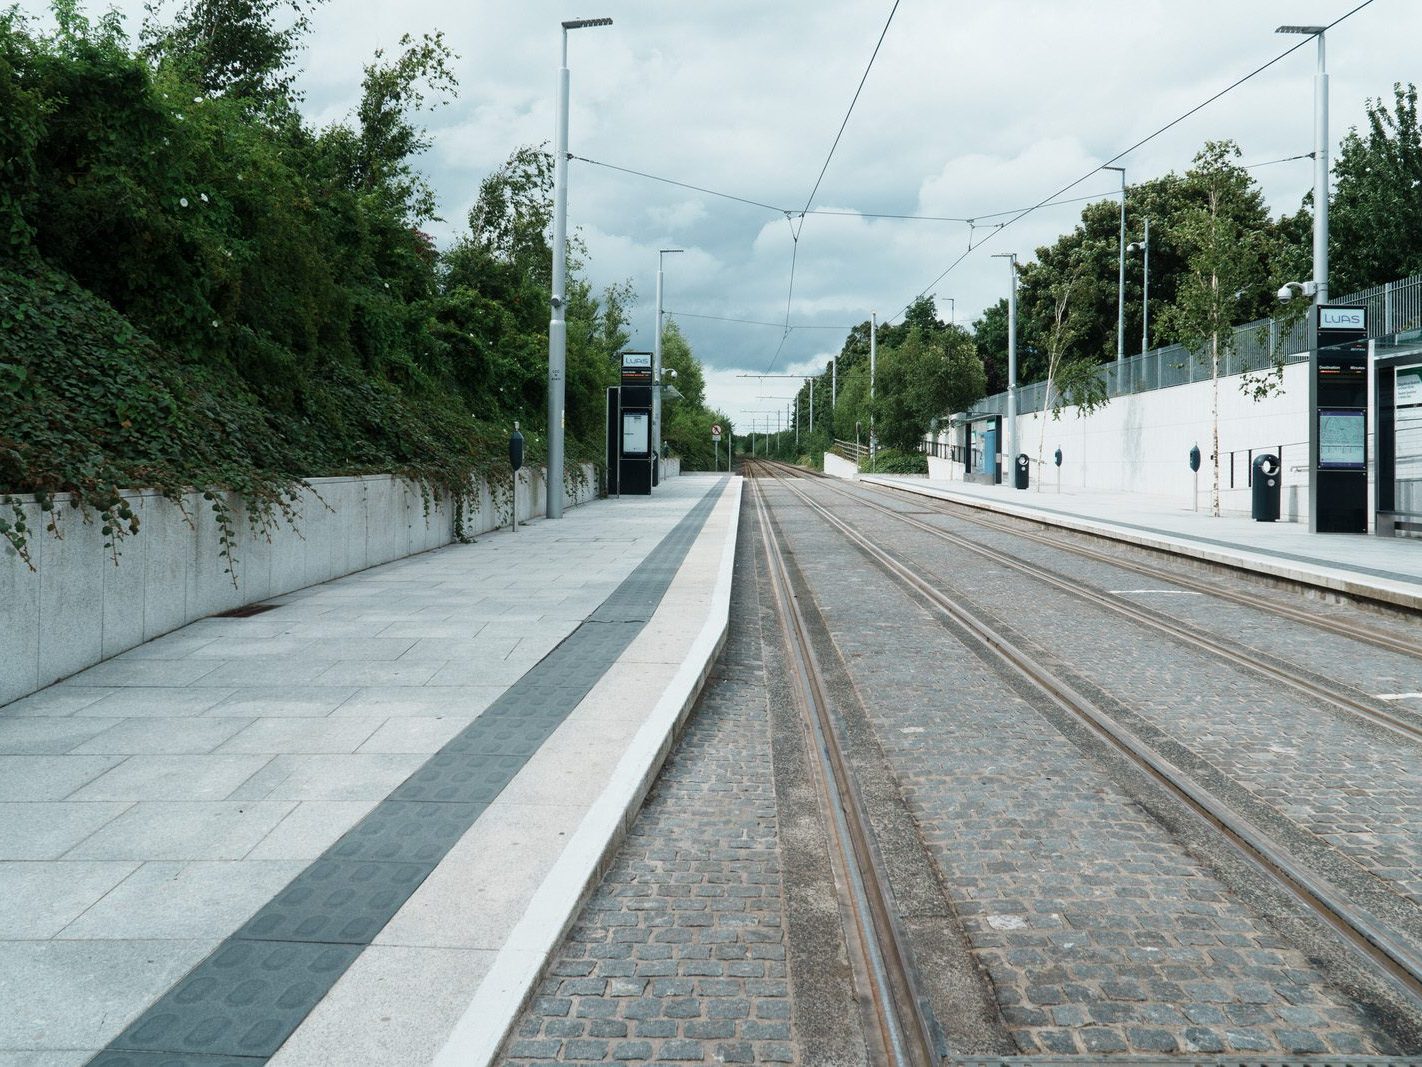 CABRA LUAS TRAM STOP ON CONNAUGHT STREET [GOOGLE BARD INCORRECTLY CLAIMED THAT THERE IS A PUBLIC TOILET AND A TICKET OFFICE] 007